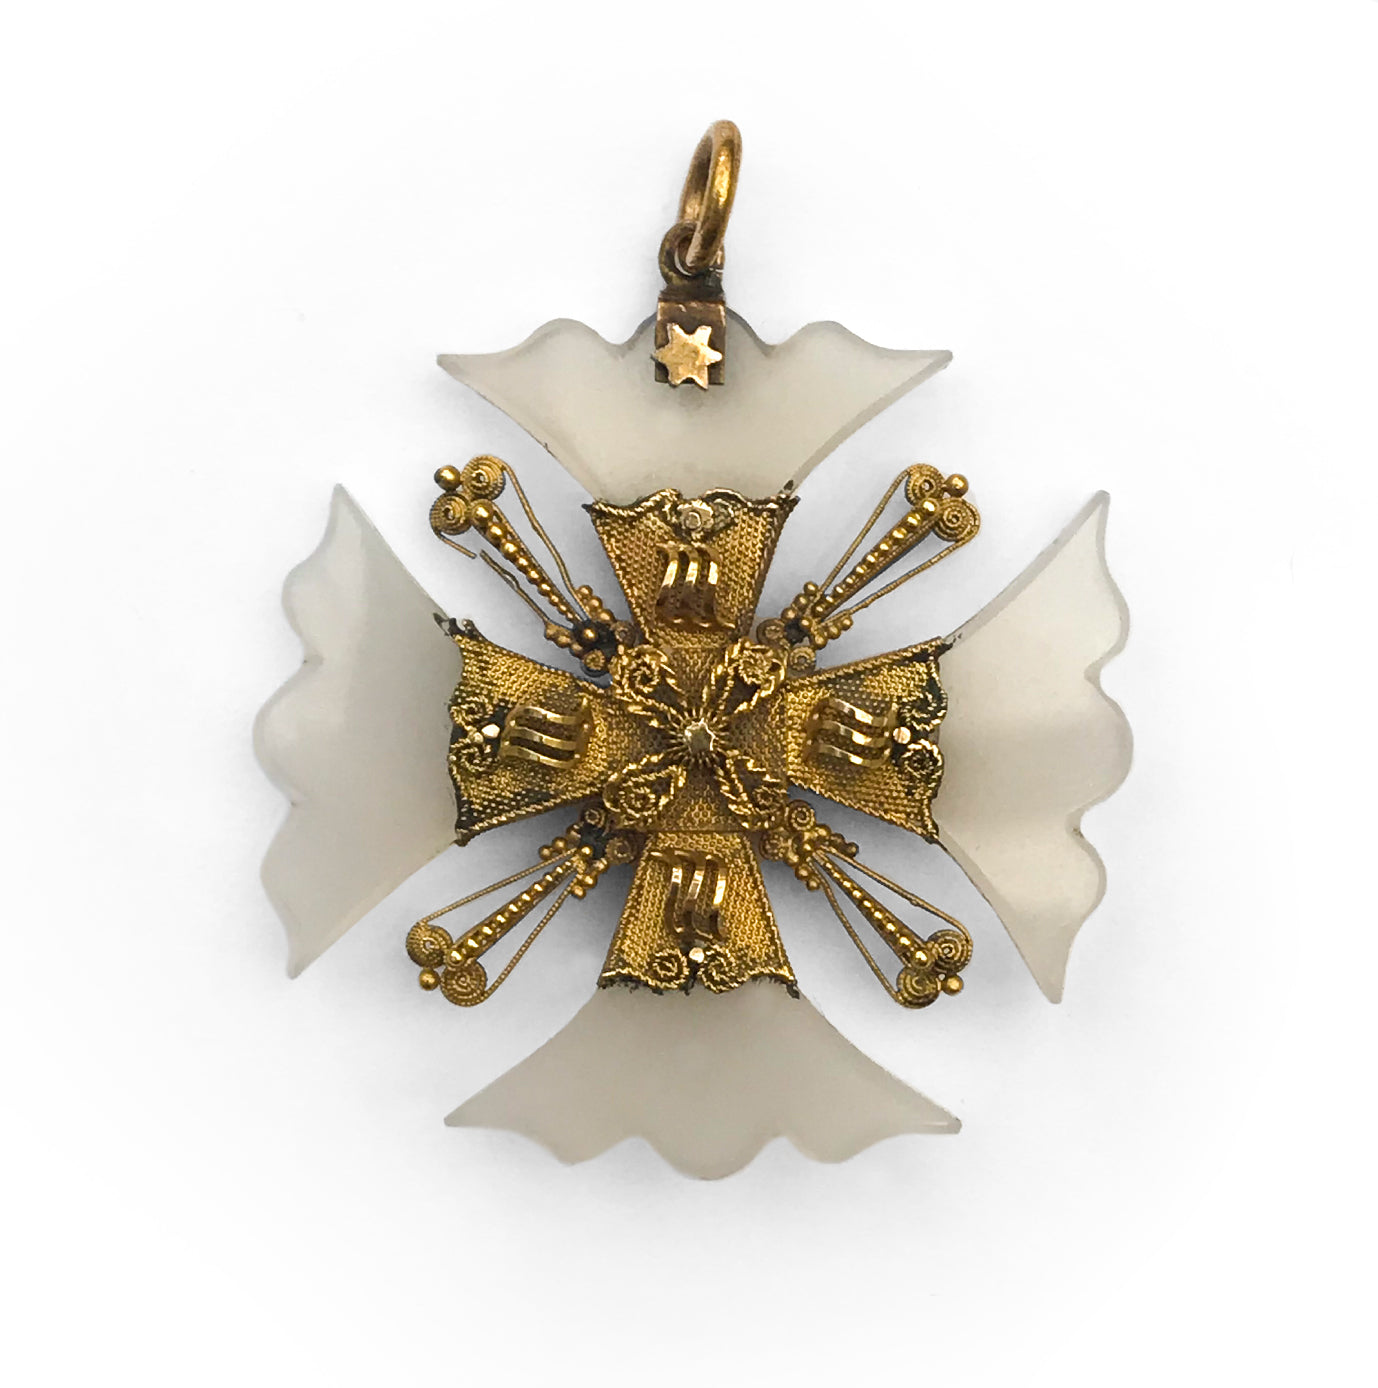 An absolutely beautiful vintage white opaque glass cross with golden filigree detail. Would look beautiful on a fine gold chain - SHOP NOW - www.intovintage.co.uk